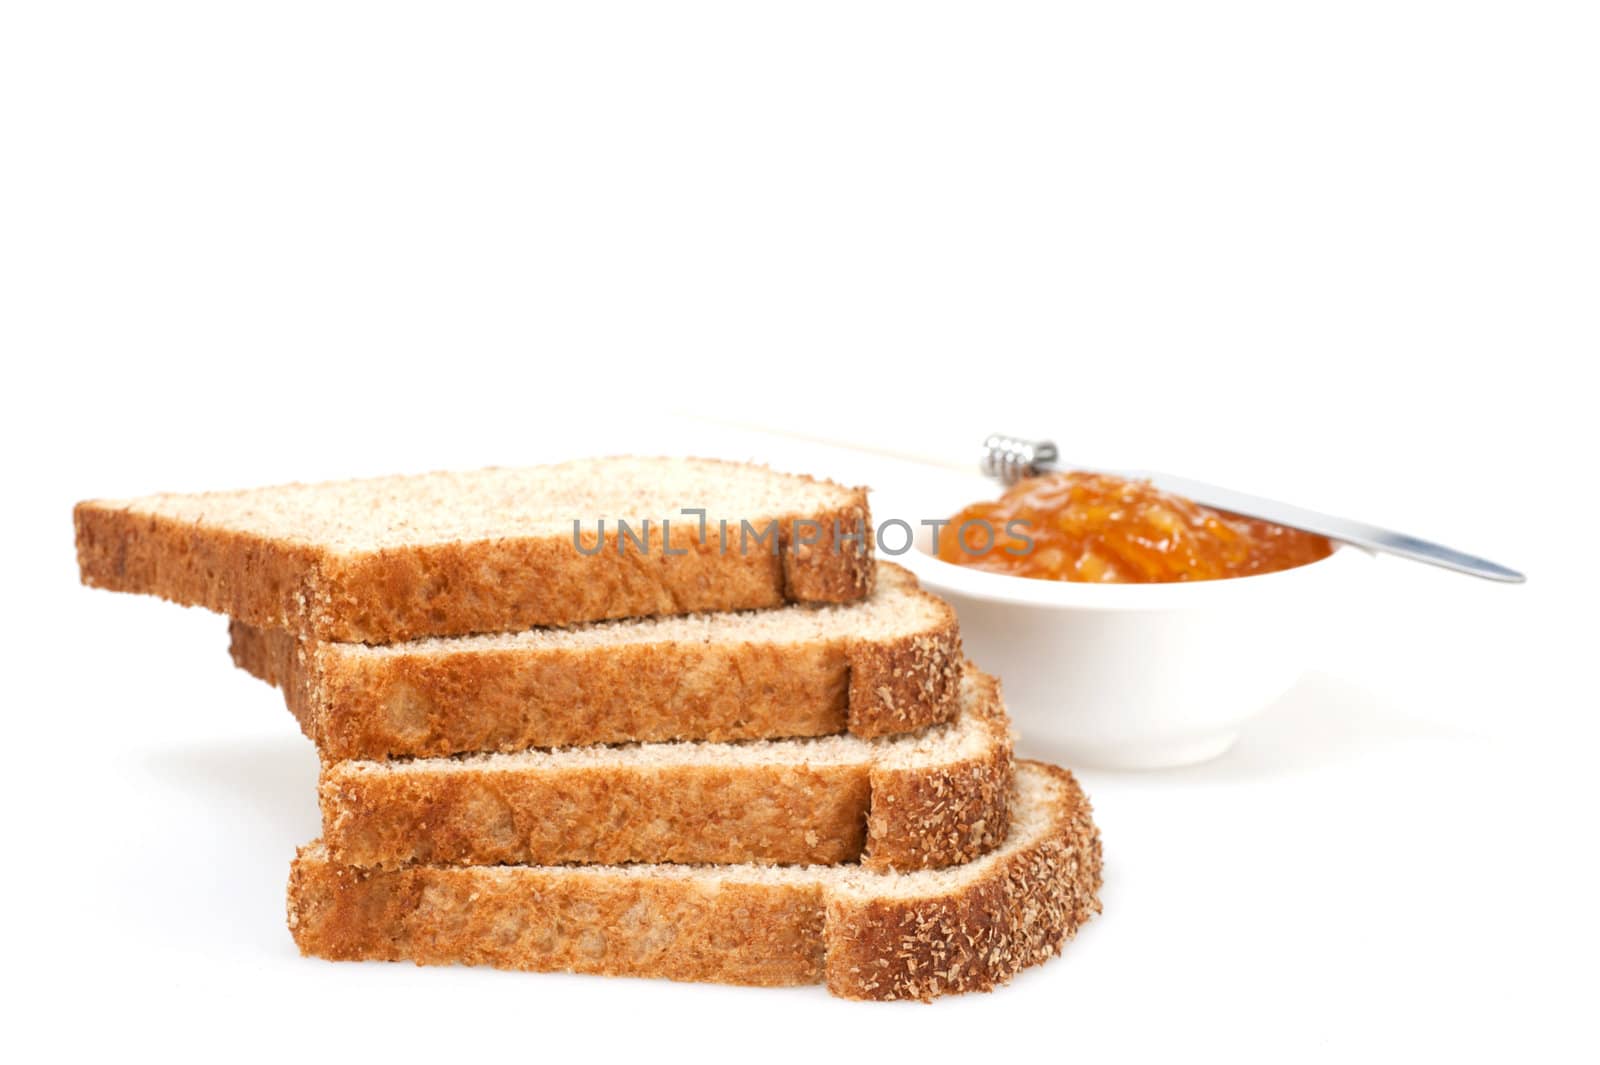 Several slices of whole grain bread with spread photographed on a white background.